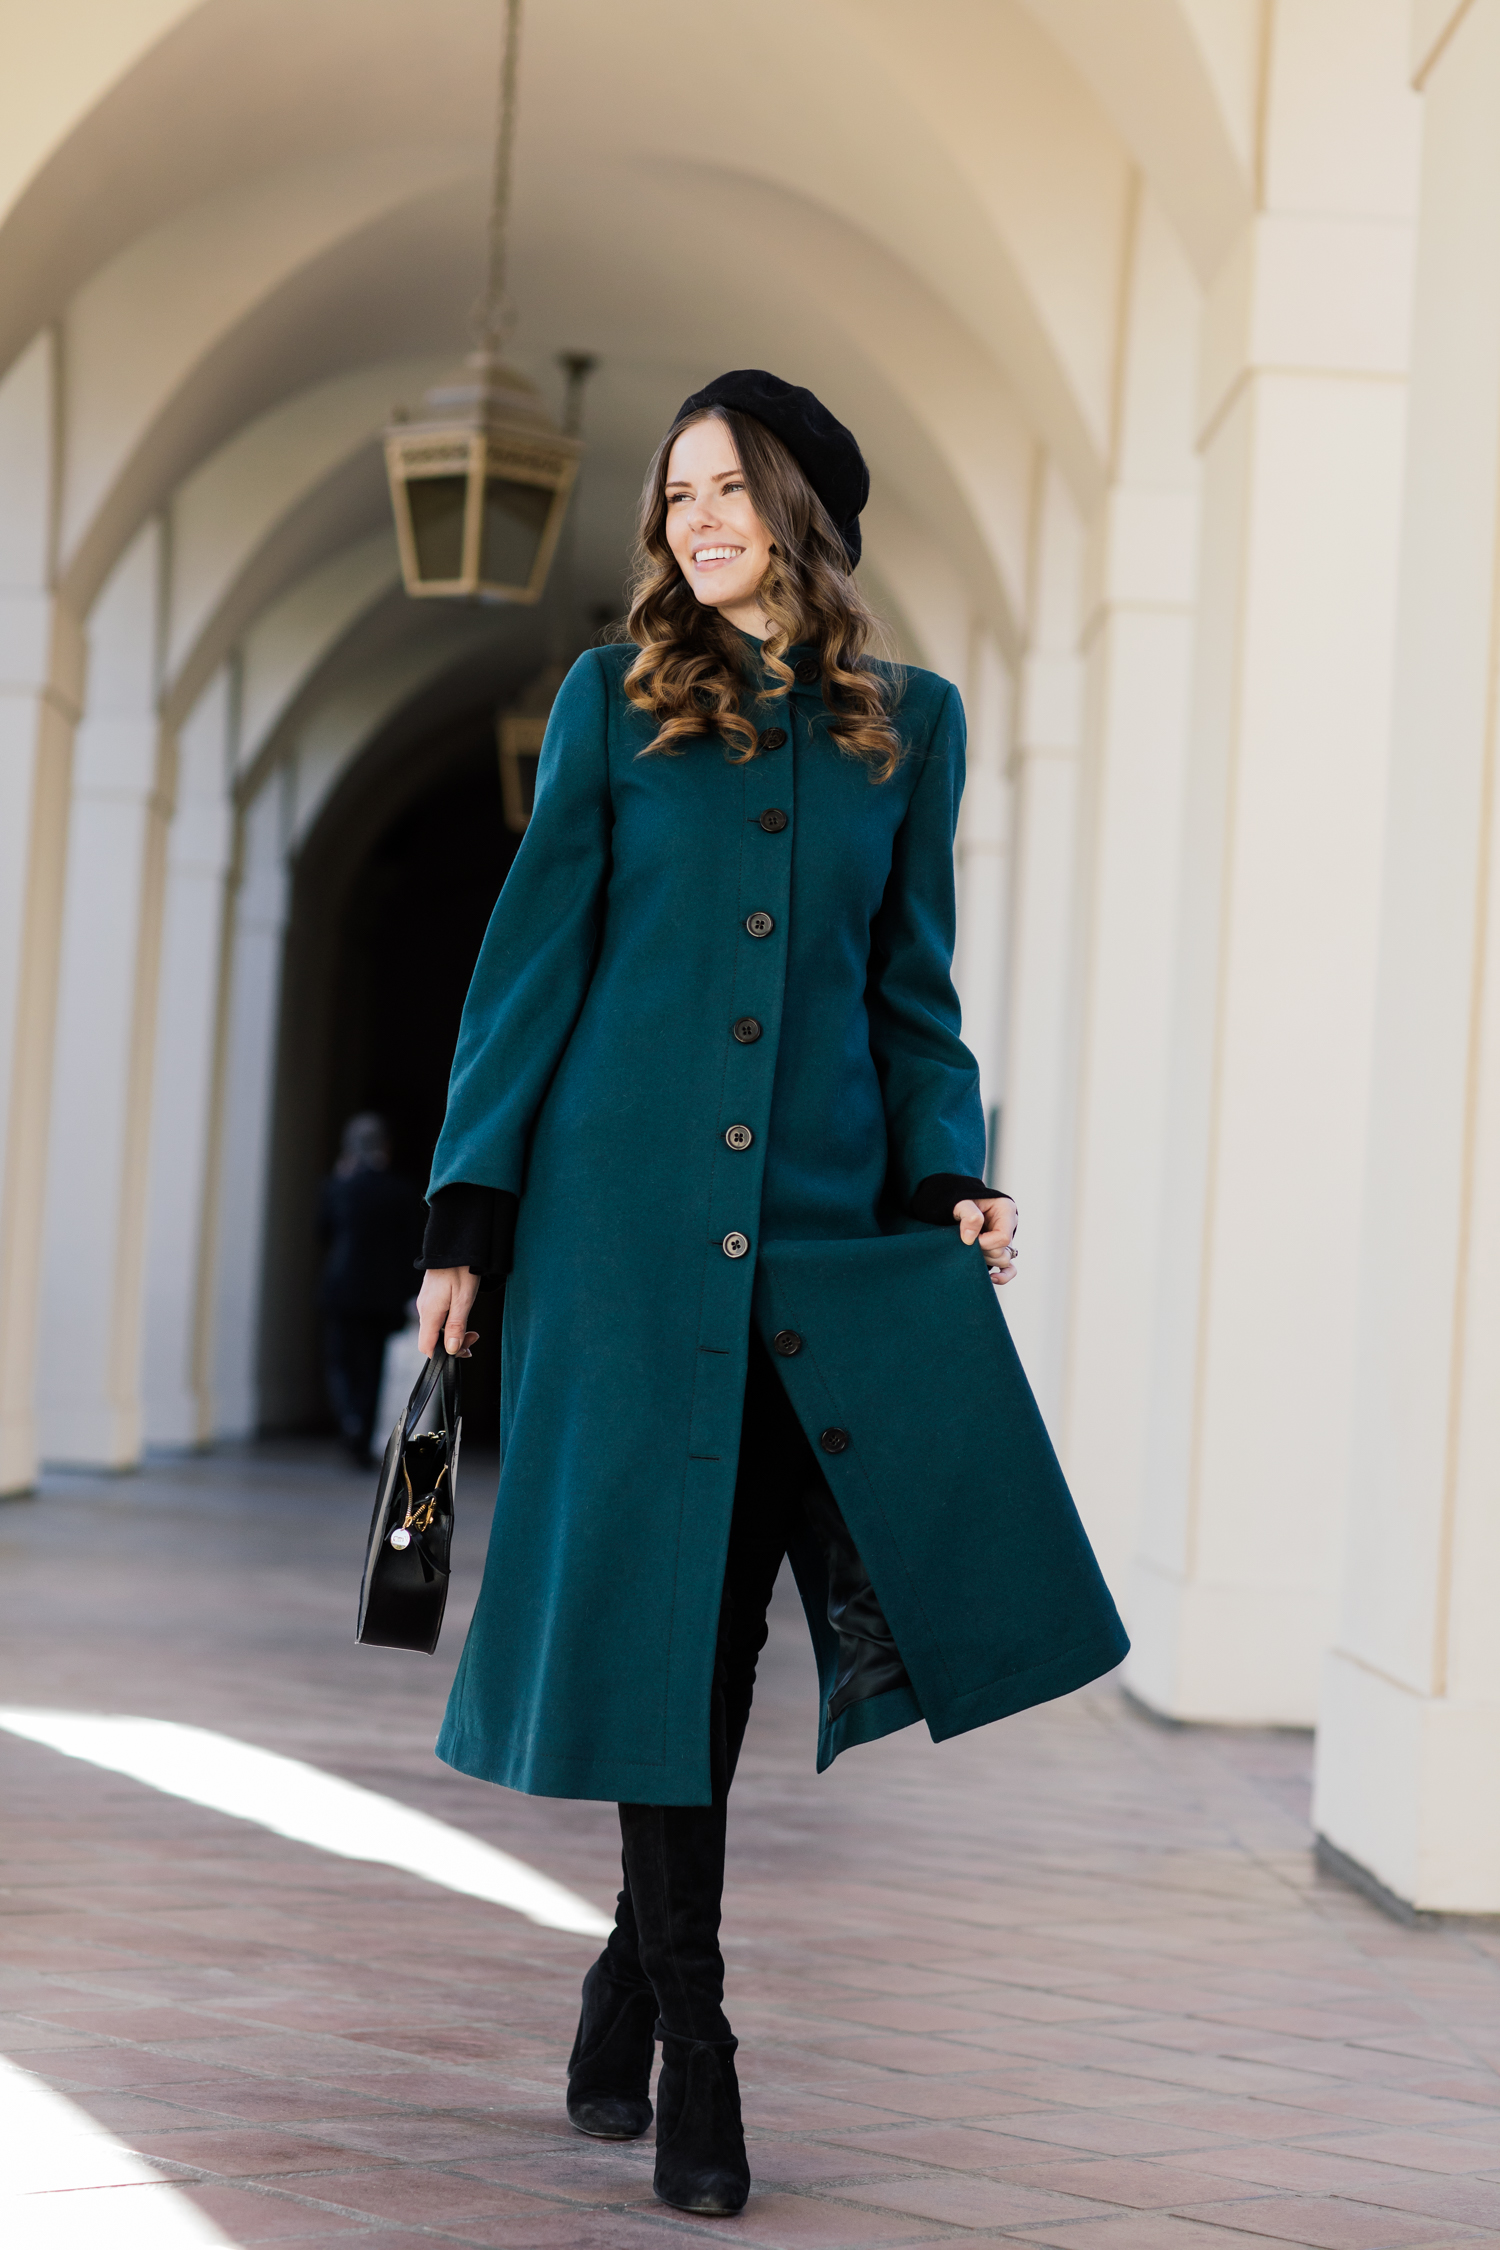 Alyssa Campanella of The A List blog channels her inner duchess wearing Frilly Audrey Coat